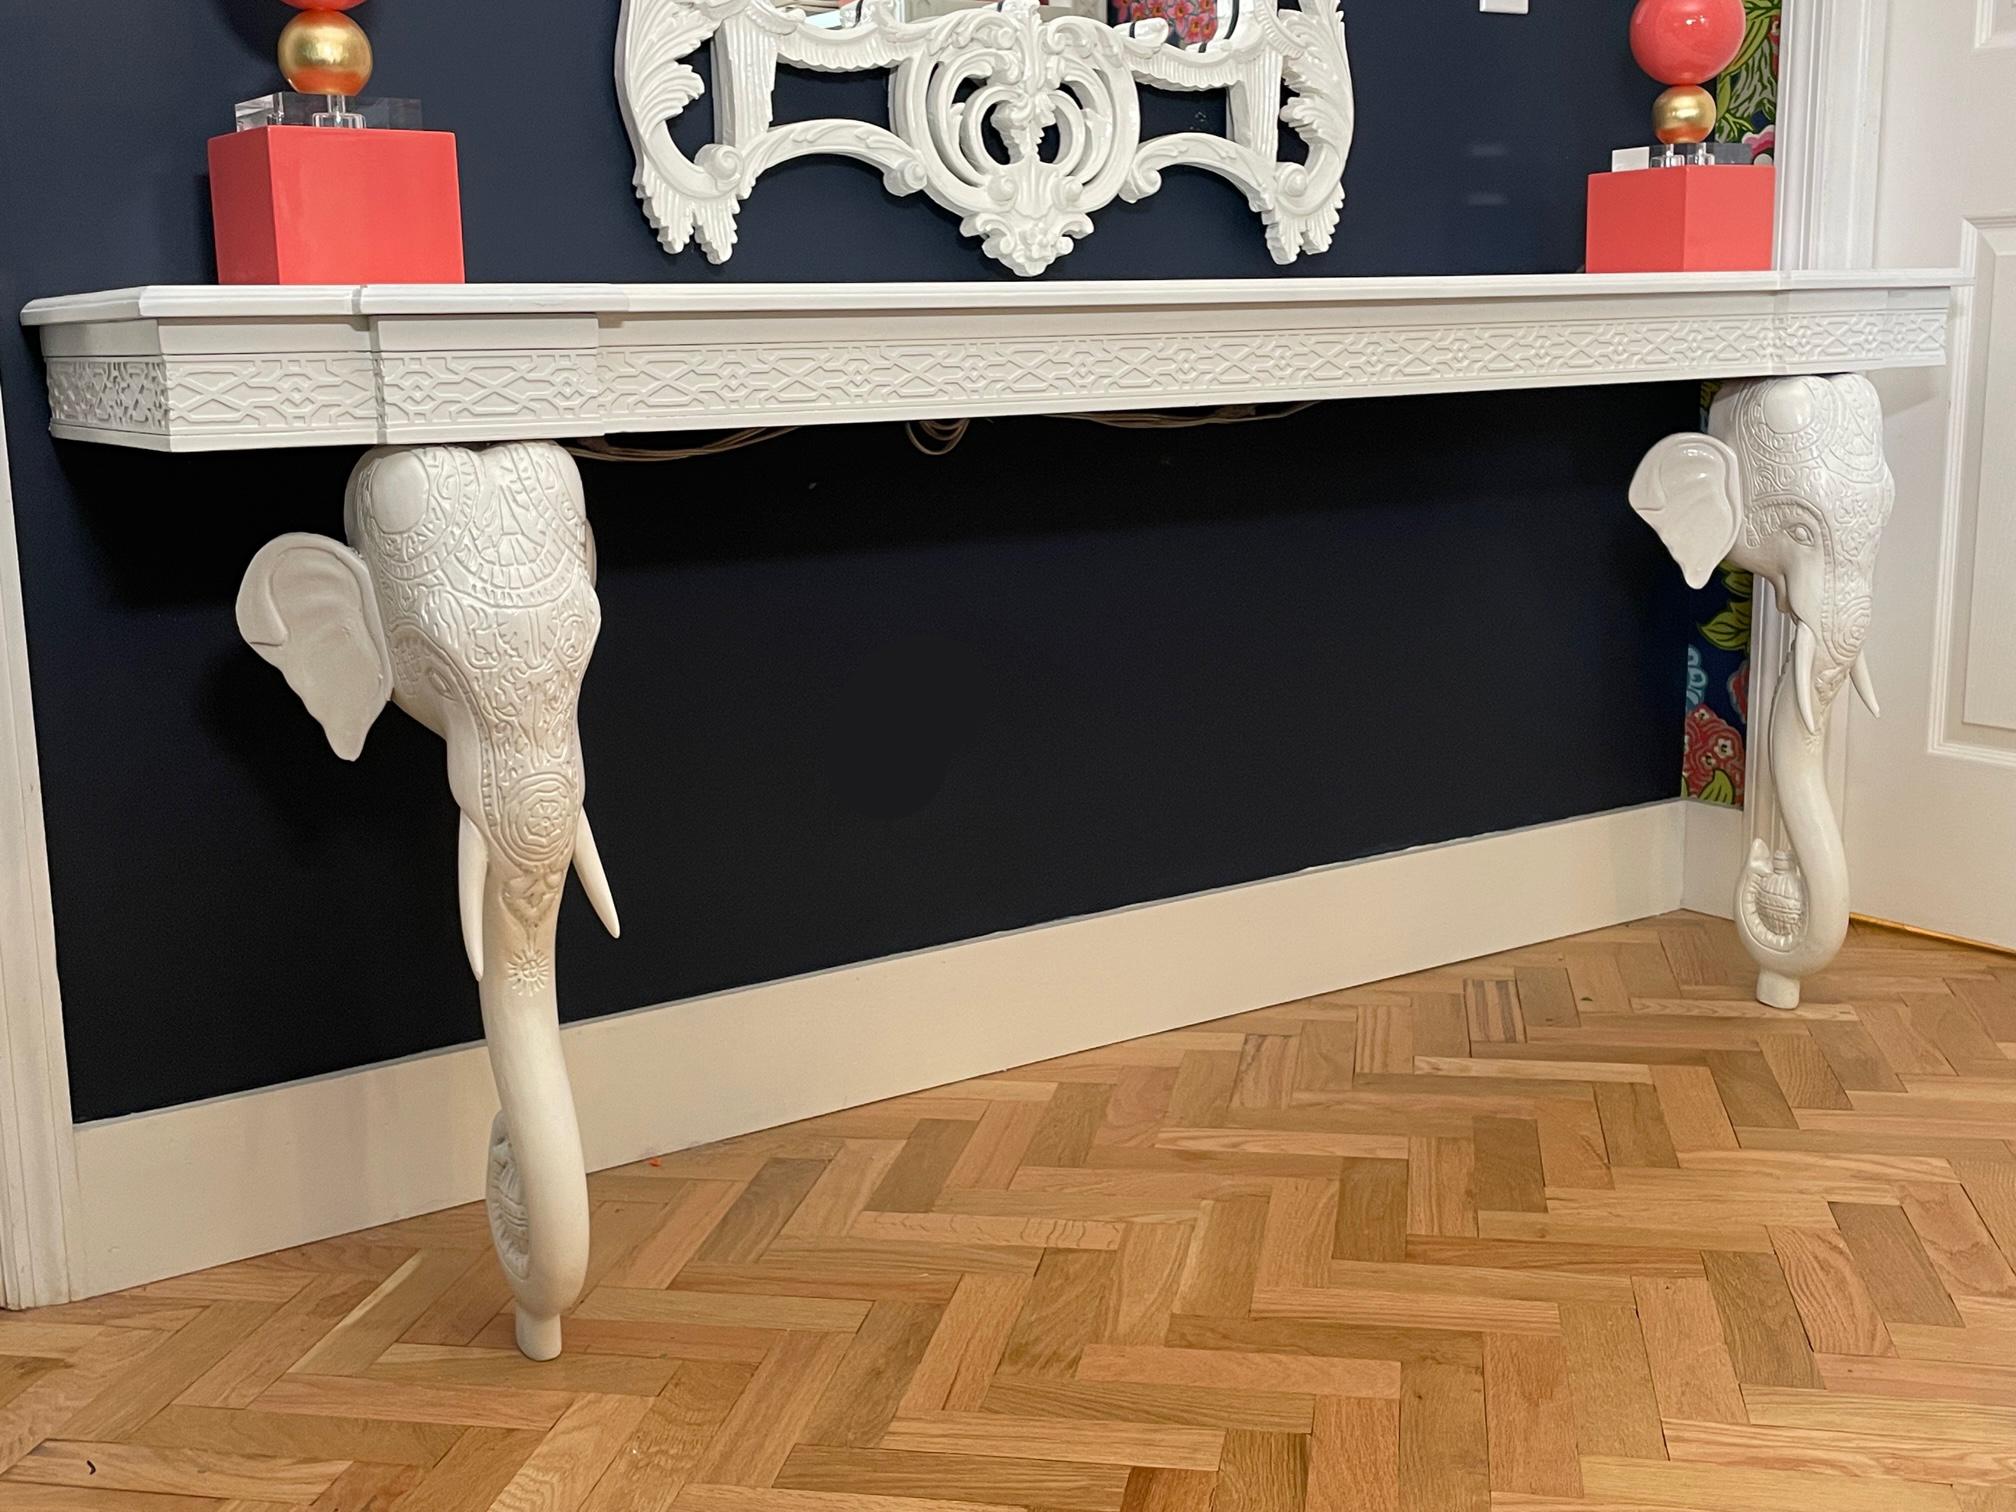 Carved wood wall mount console table by Gampel-Stoll features decorative elephant head legs and fretwork skirt. Rare 6-foot version of this iconic design. Good condition with minor imperfections consistent with age (see photos).
 
 